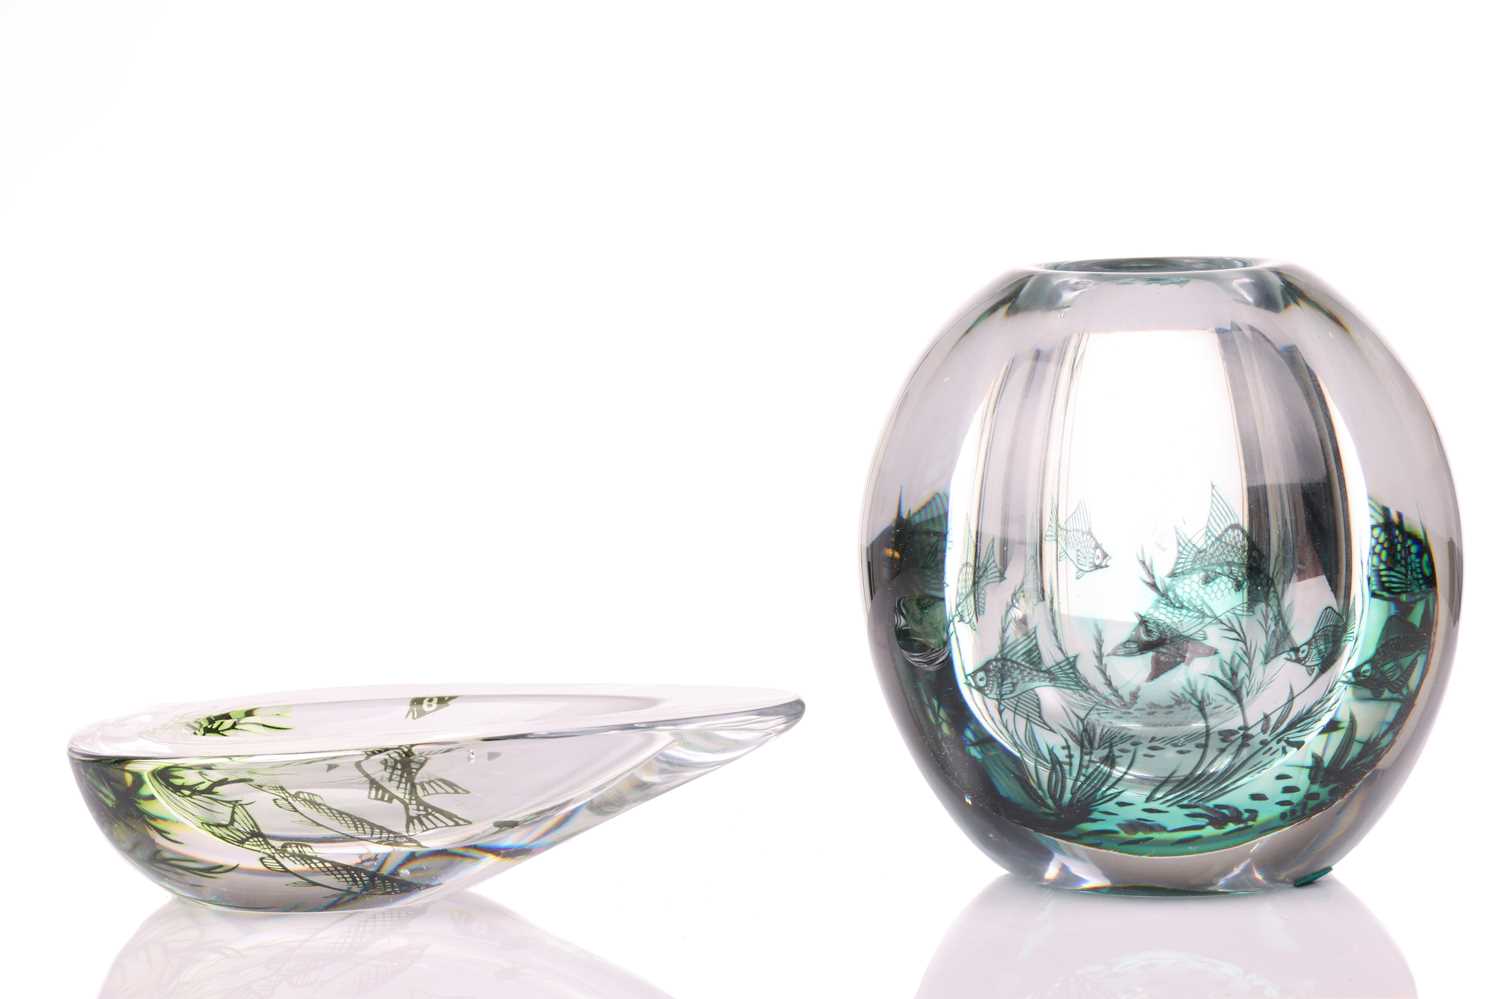 Edward Hald (1883-1980) for Orrefors, a Fiskgraal glass vase, with internal decoration of fish